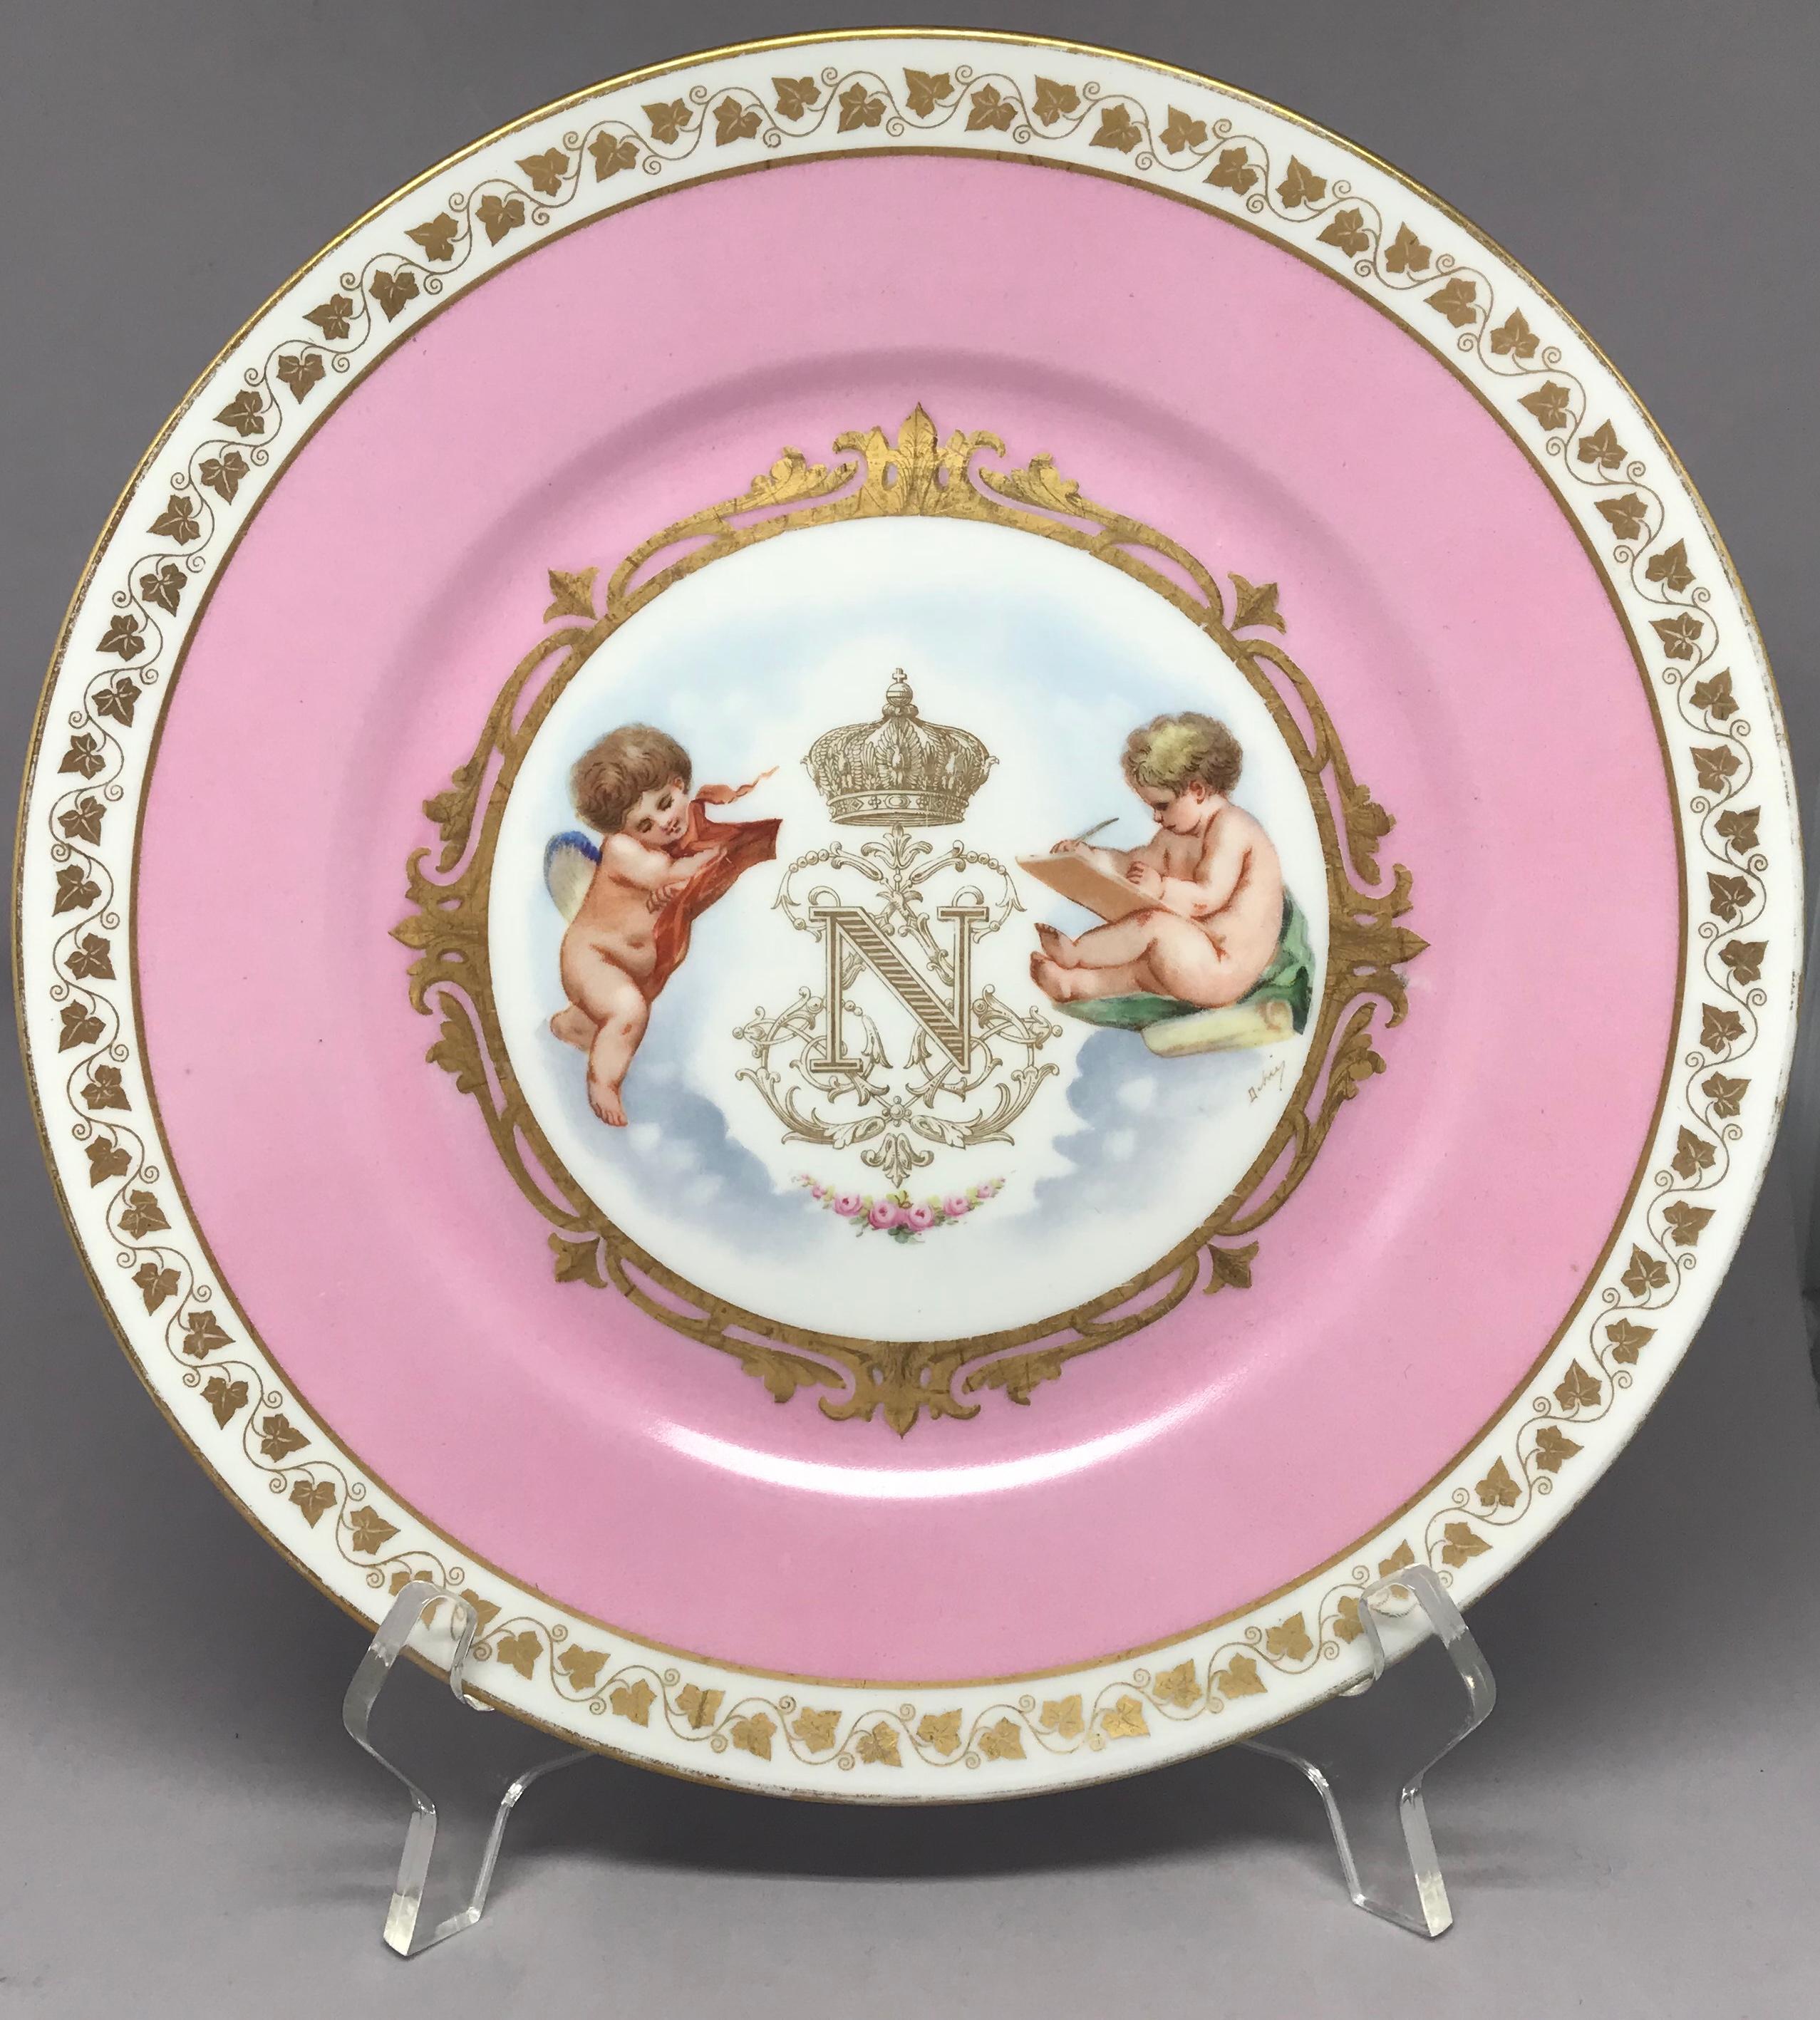 Sèvres pink and gilt Napoleon plate. Valentine’s pink and gilt decorated plate in perfect condition with a white ground featuring putti to either side of gilt crowned N, the cipher of Napoleon III, Emperor of France. Sèvres and Palace of Tuileries